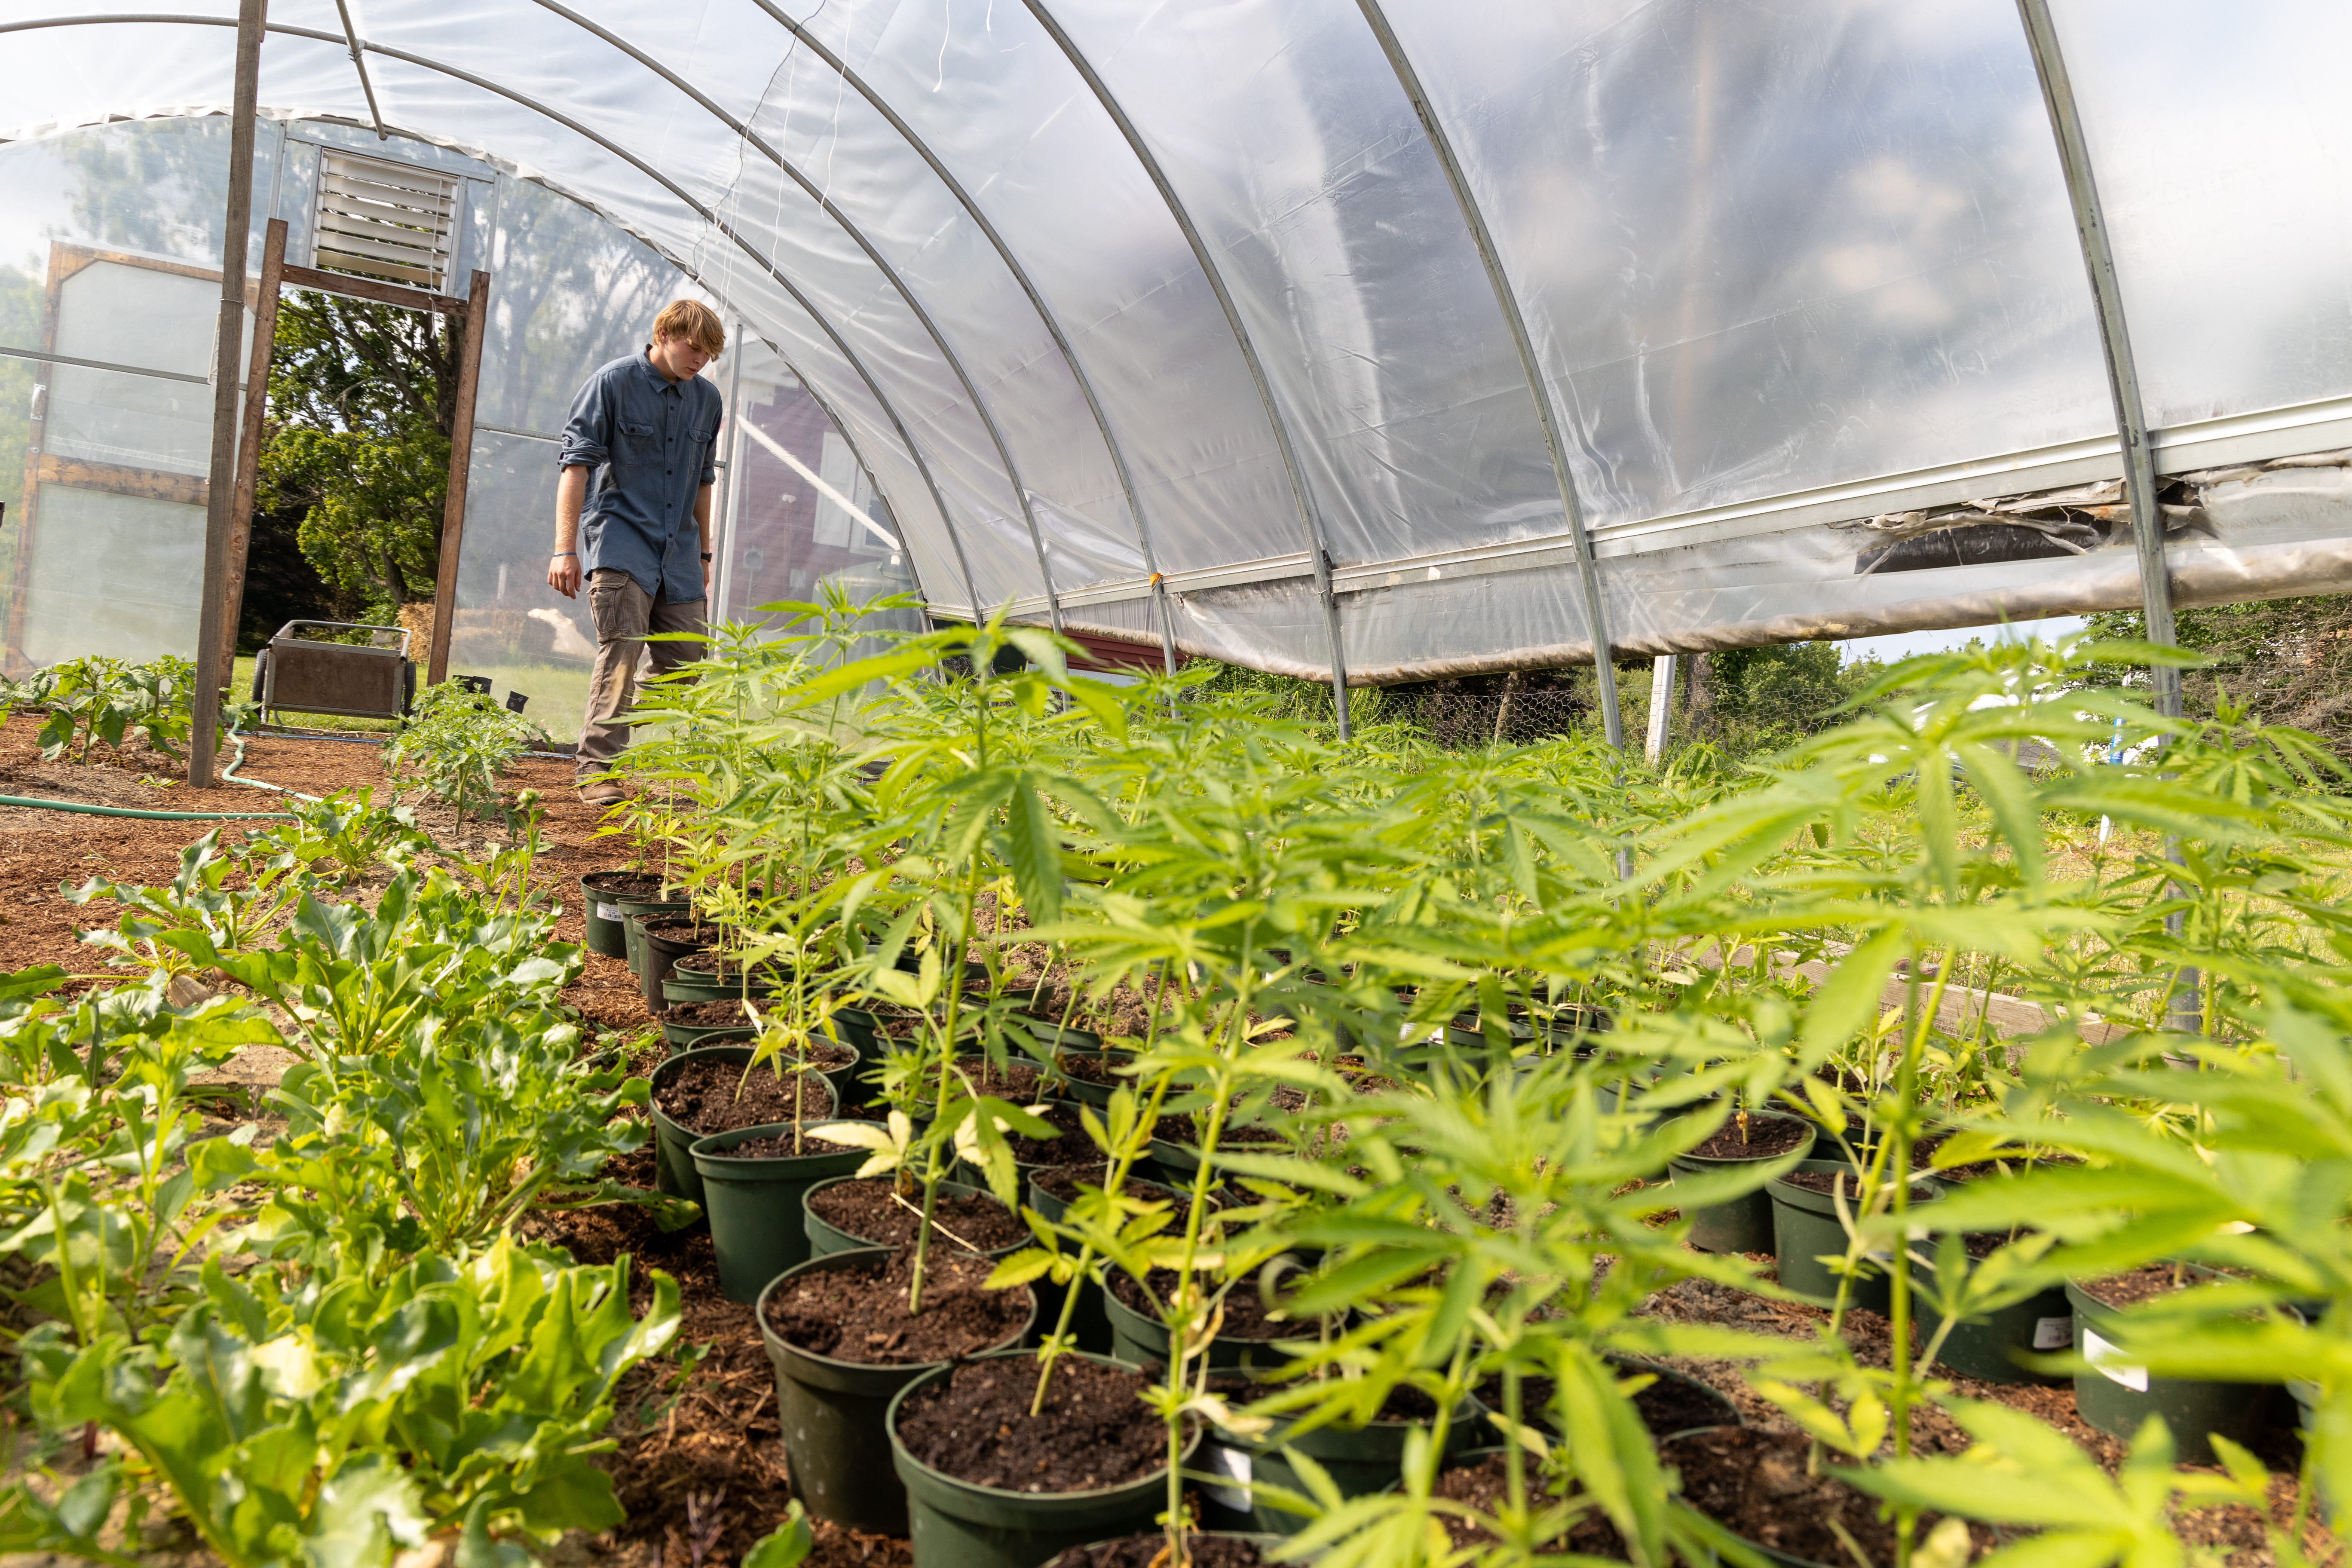 SUNY Adirondack Farm Manager Tommy Donolli walks among hemp plants in the campus greenhouse